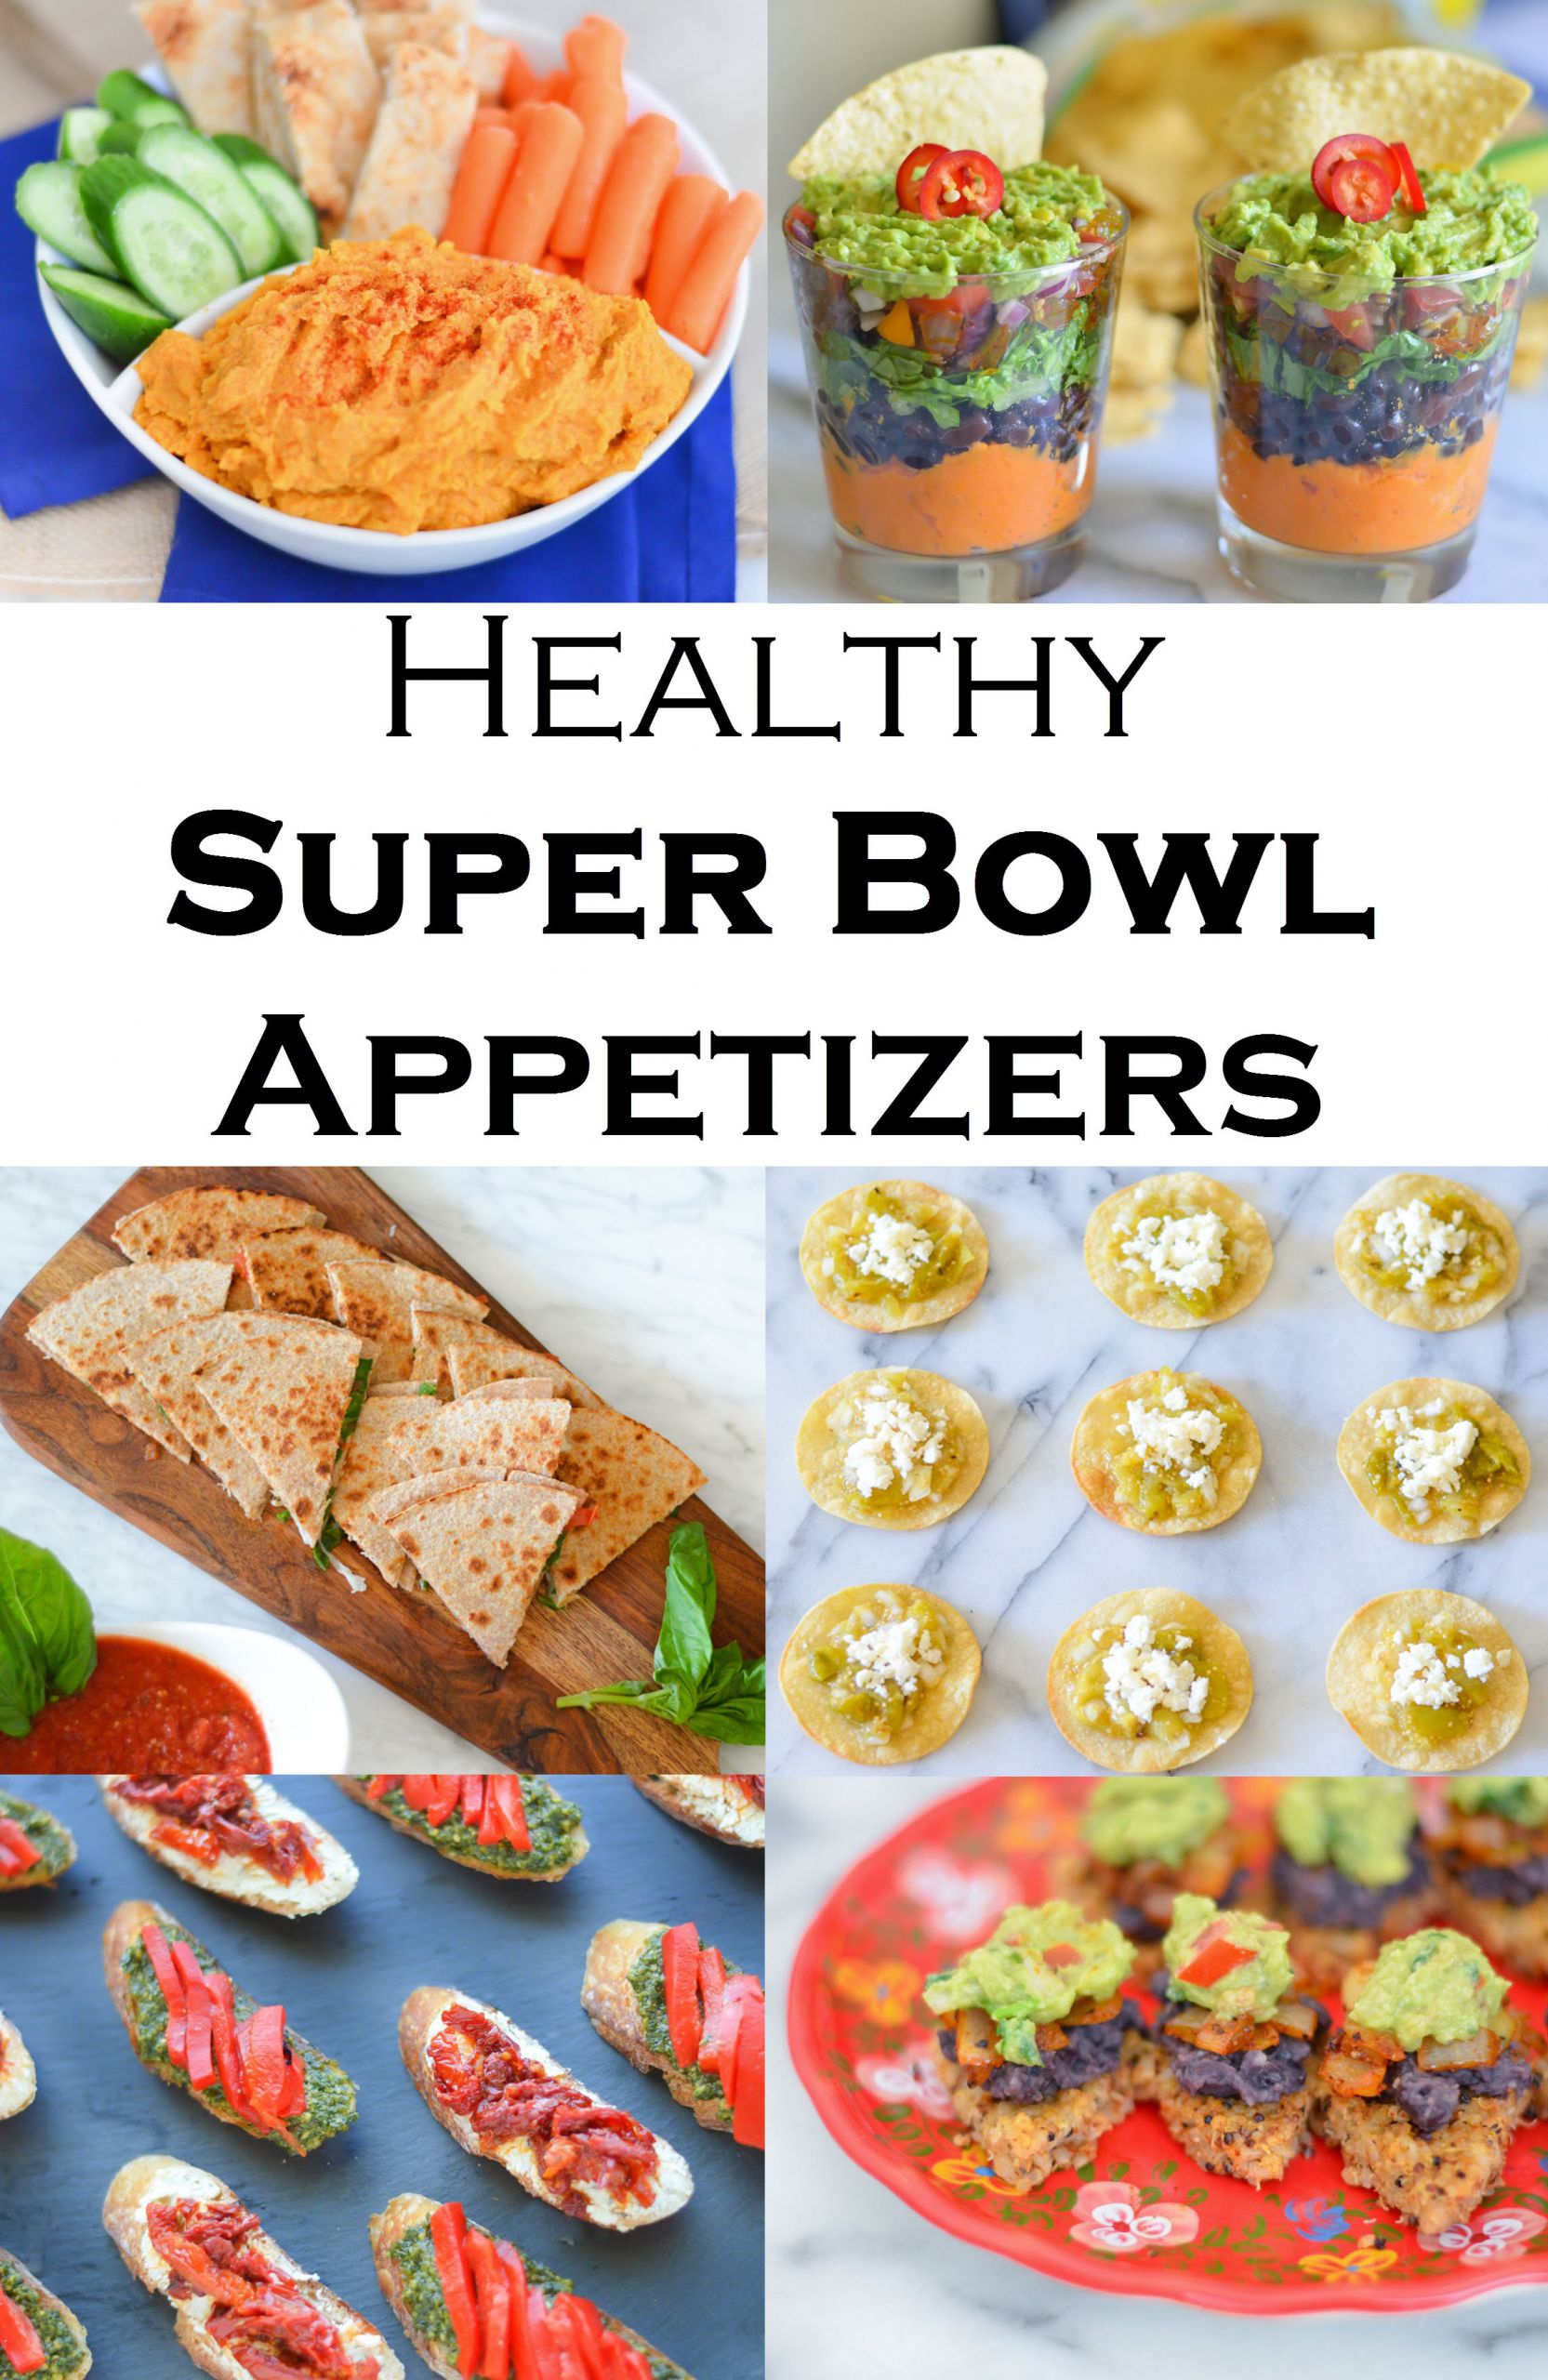 Superbowl Healthy Appetizers
 Healthy Super Bowl Recipes For Everyone